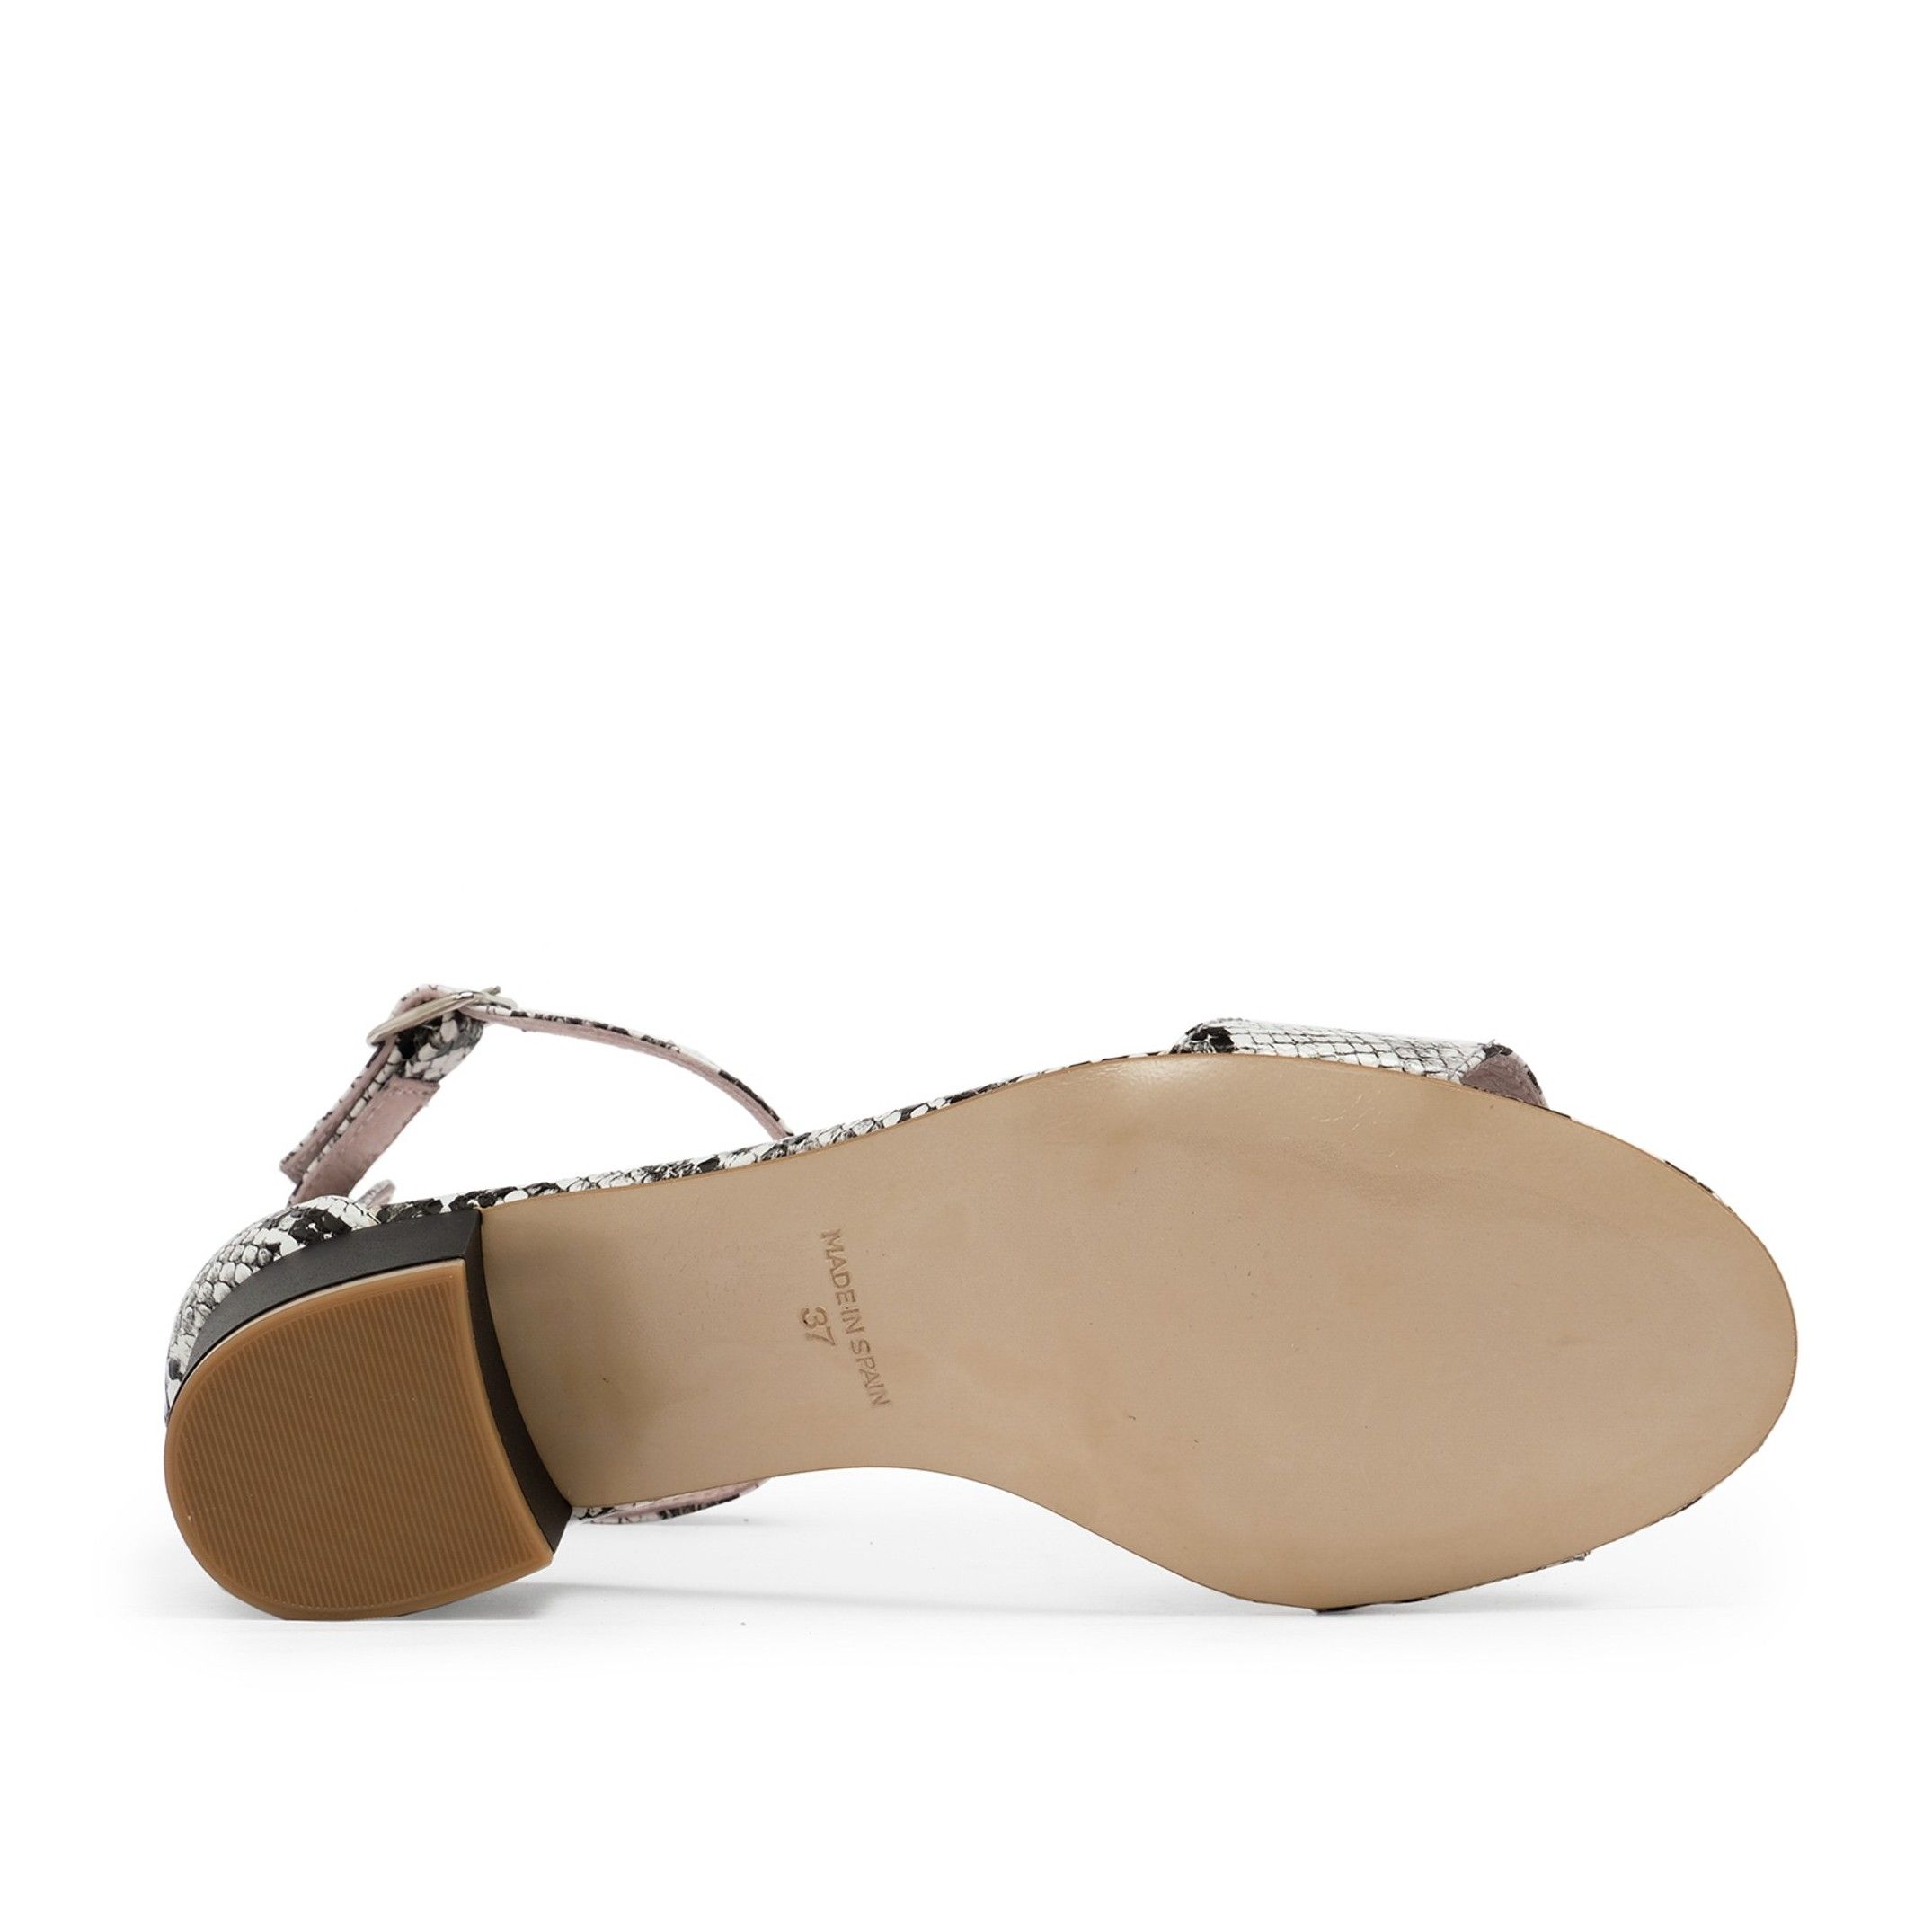 Classic sandals with heel for women. By Eva Lopez. Upper: leatherette. Closure: Metal buckle. Inner lining and insole: pig lining. Sole material: Cuerolite. Heel height: 4.5 cm. Designed and manufactured in Spain.